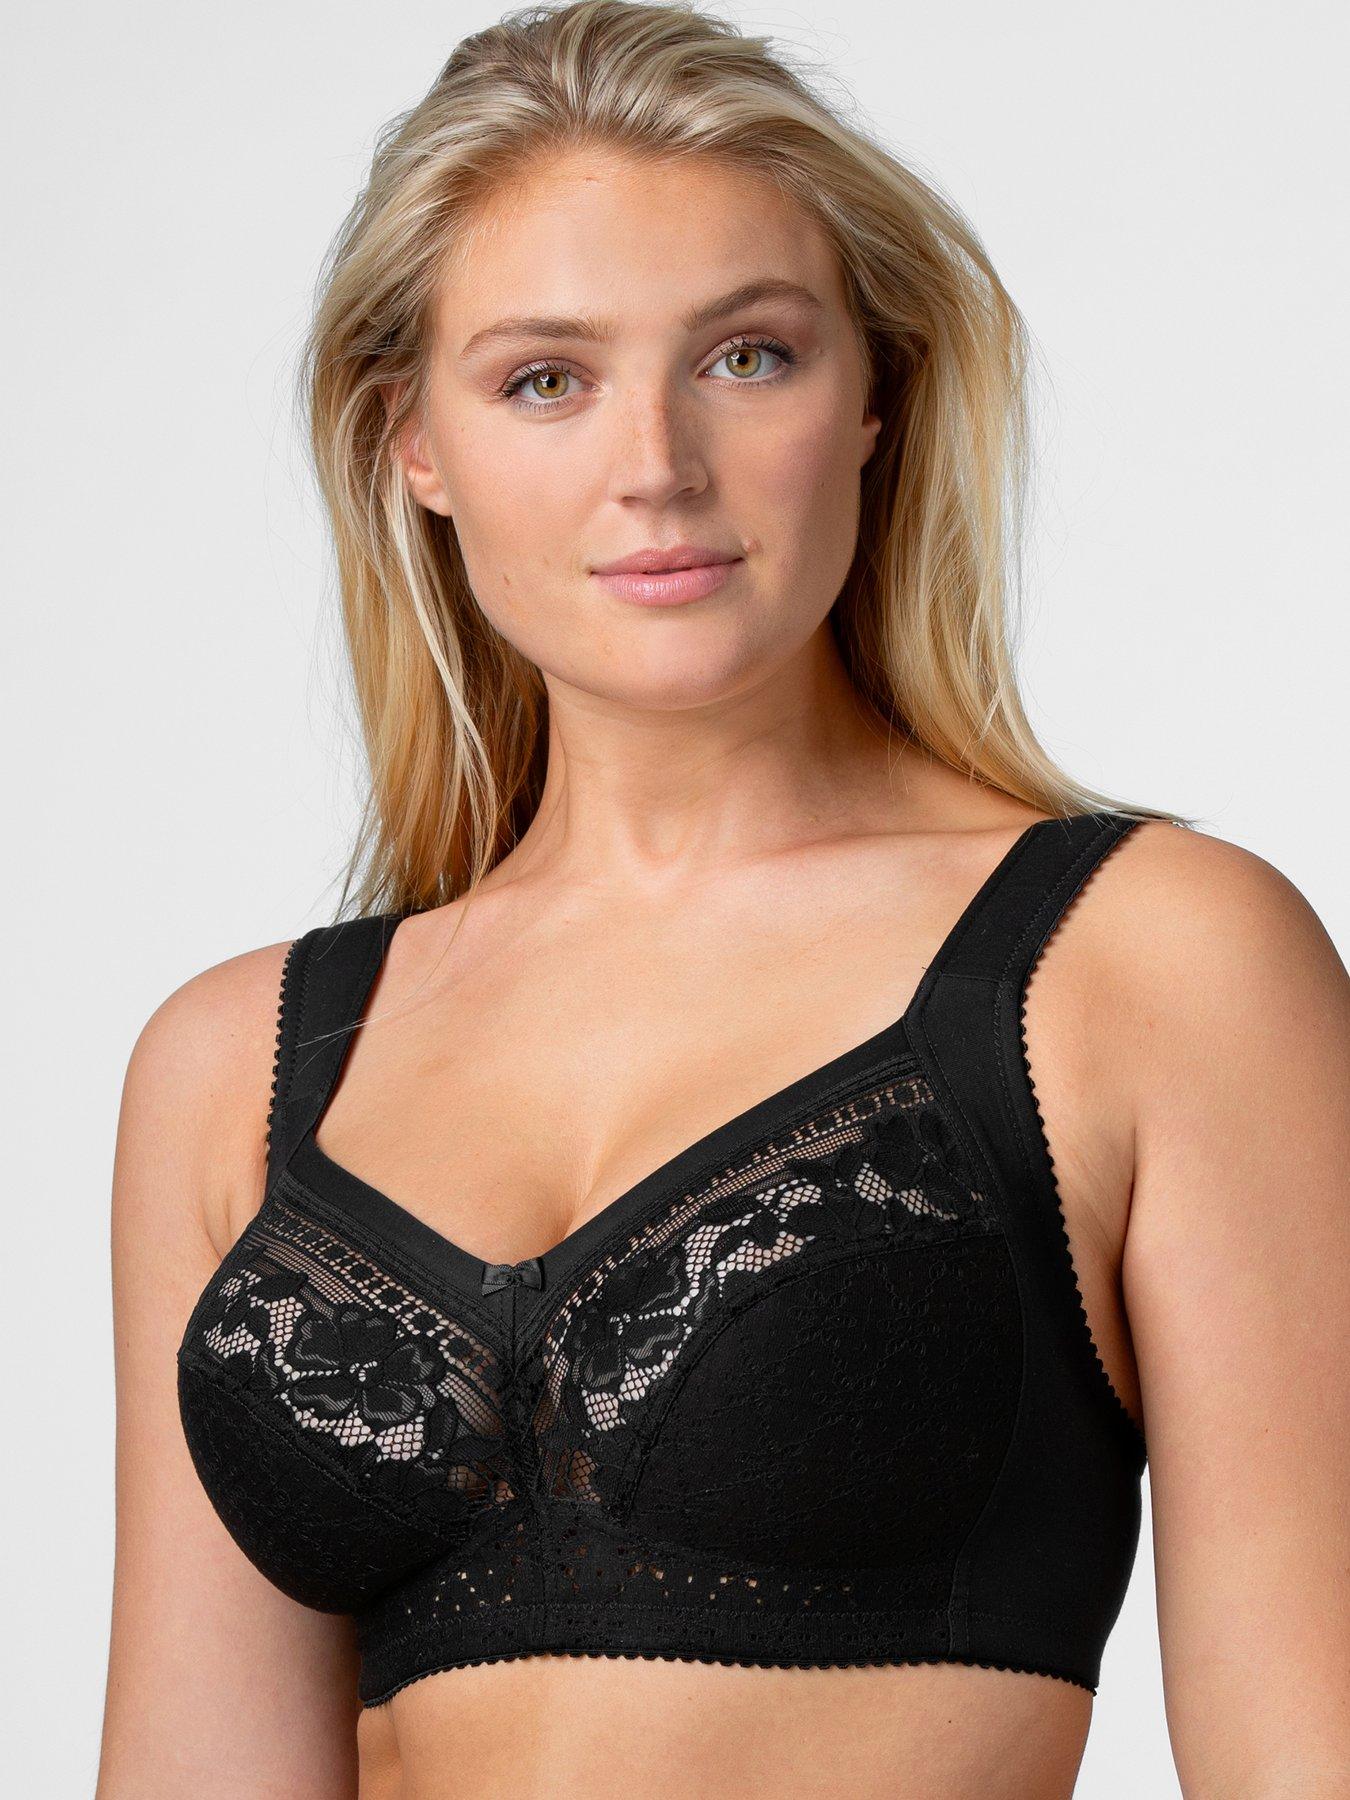 Miss Mary of Sweden Miss Mary Dotty Delicious Lace Underwired Bra